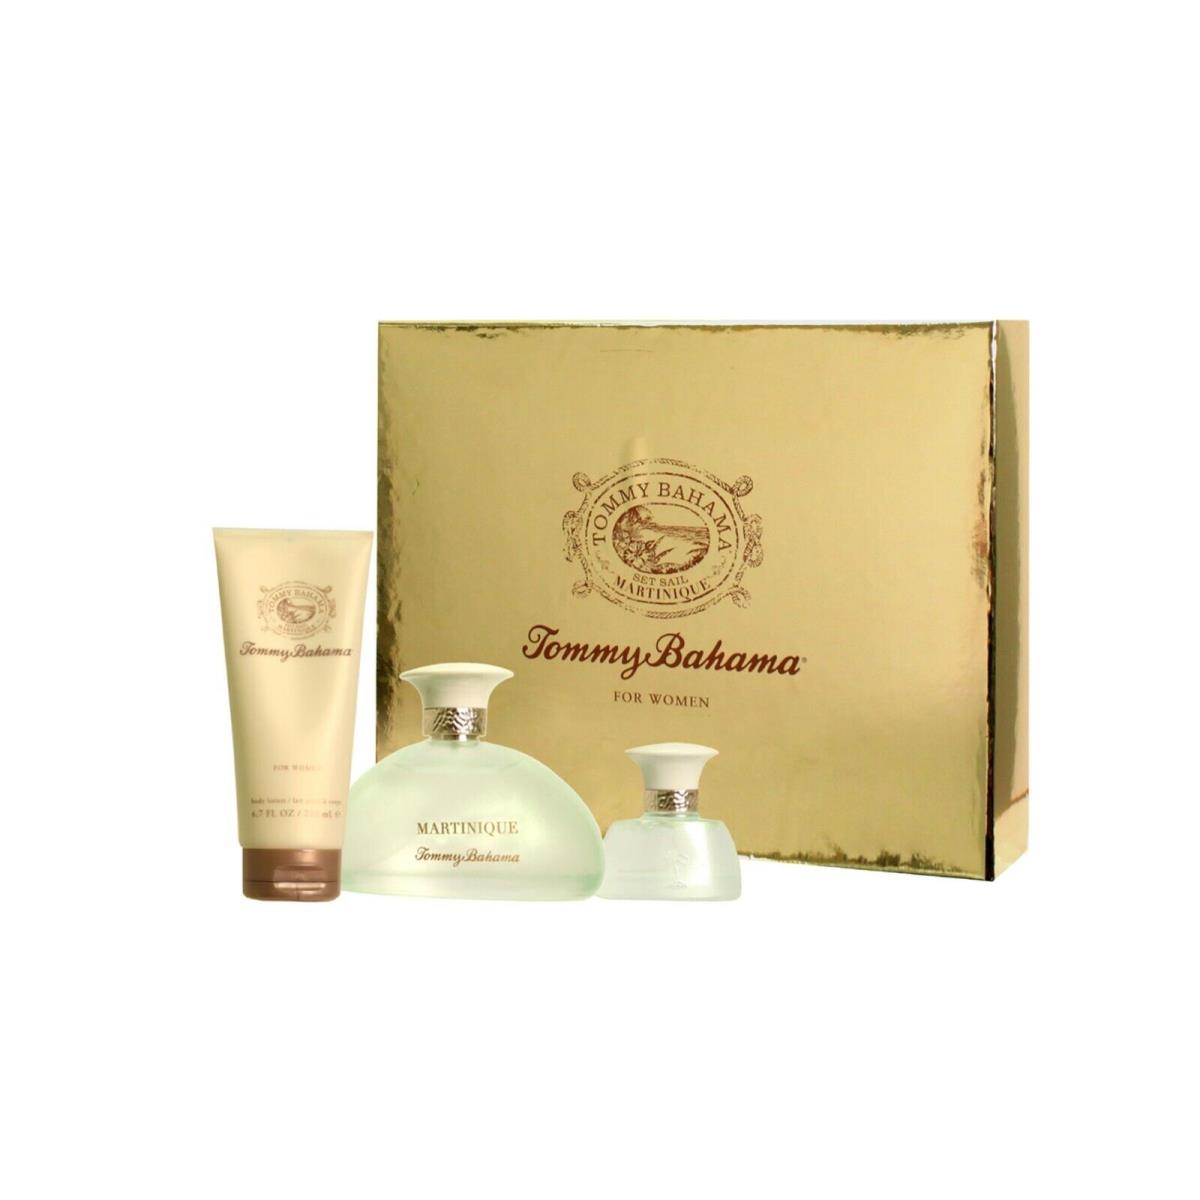 Tommy Bahama Martinique Perfume For Women 3.4 OZ Edp Spray 3 Piece Gift